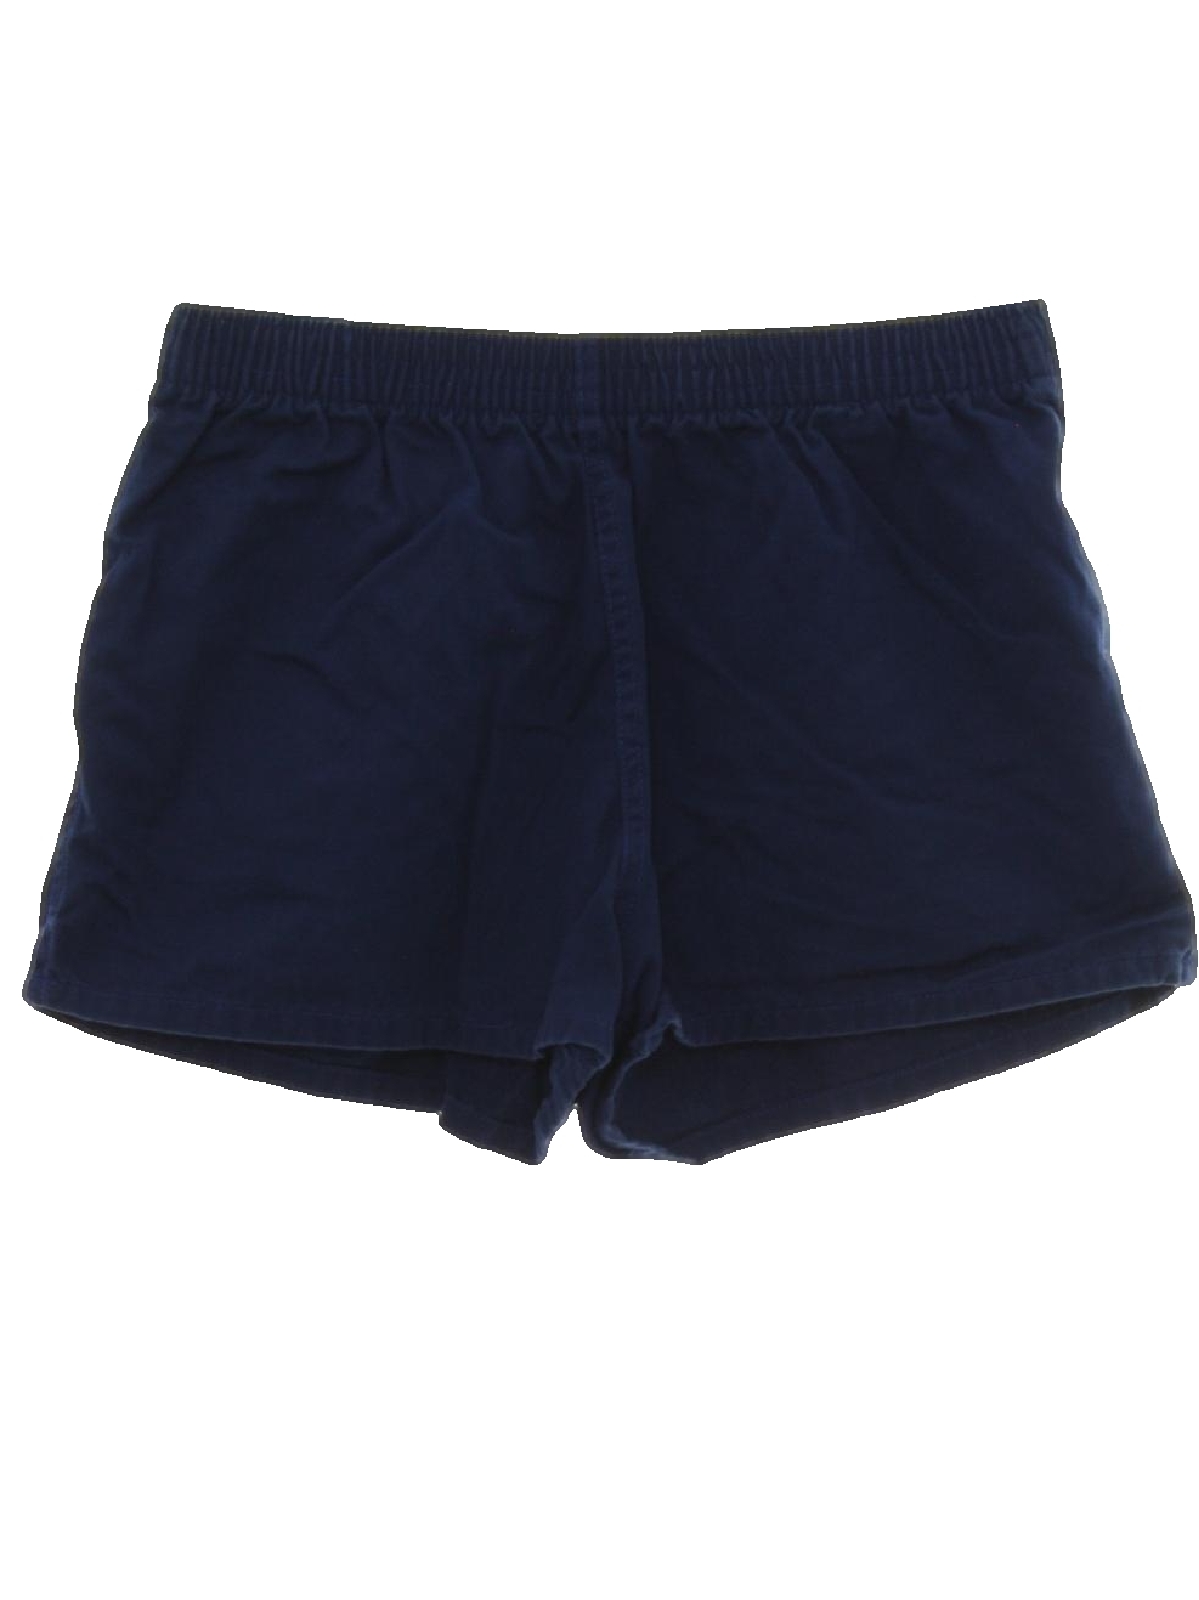 ca Eighties Vintage Shorts: Late 80s or Early 90s -ca- Mens navy blue ...